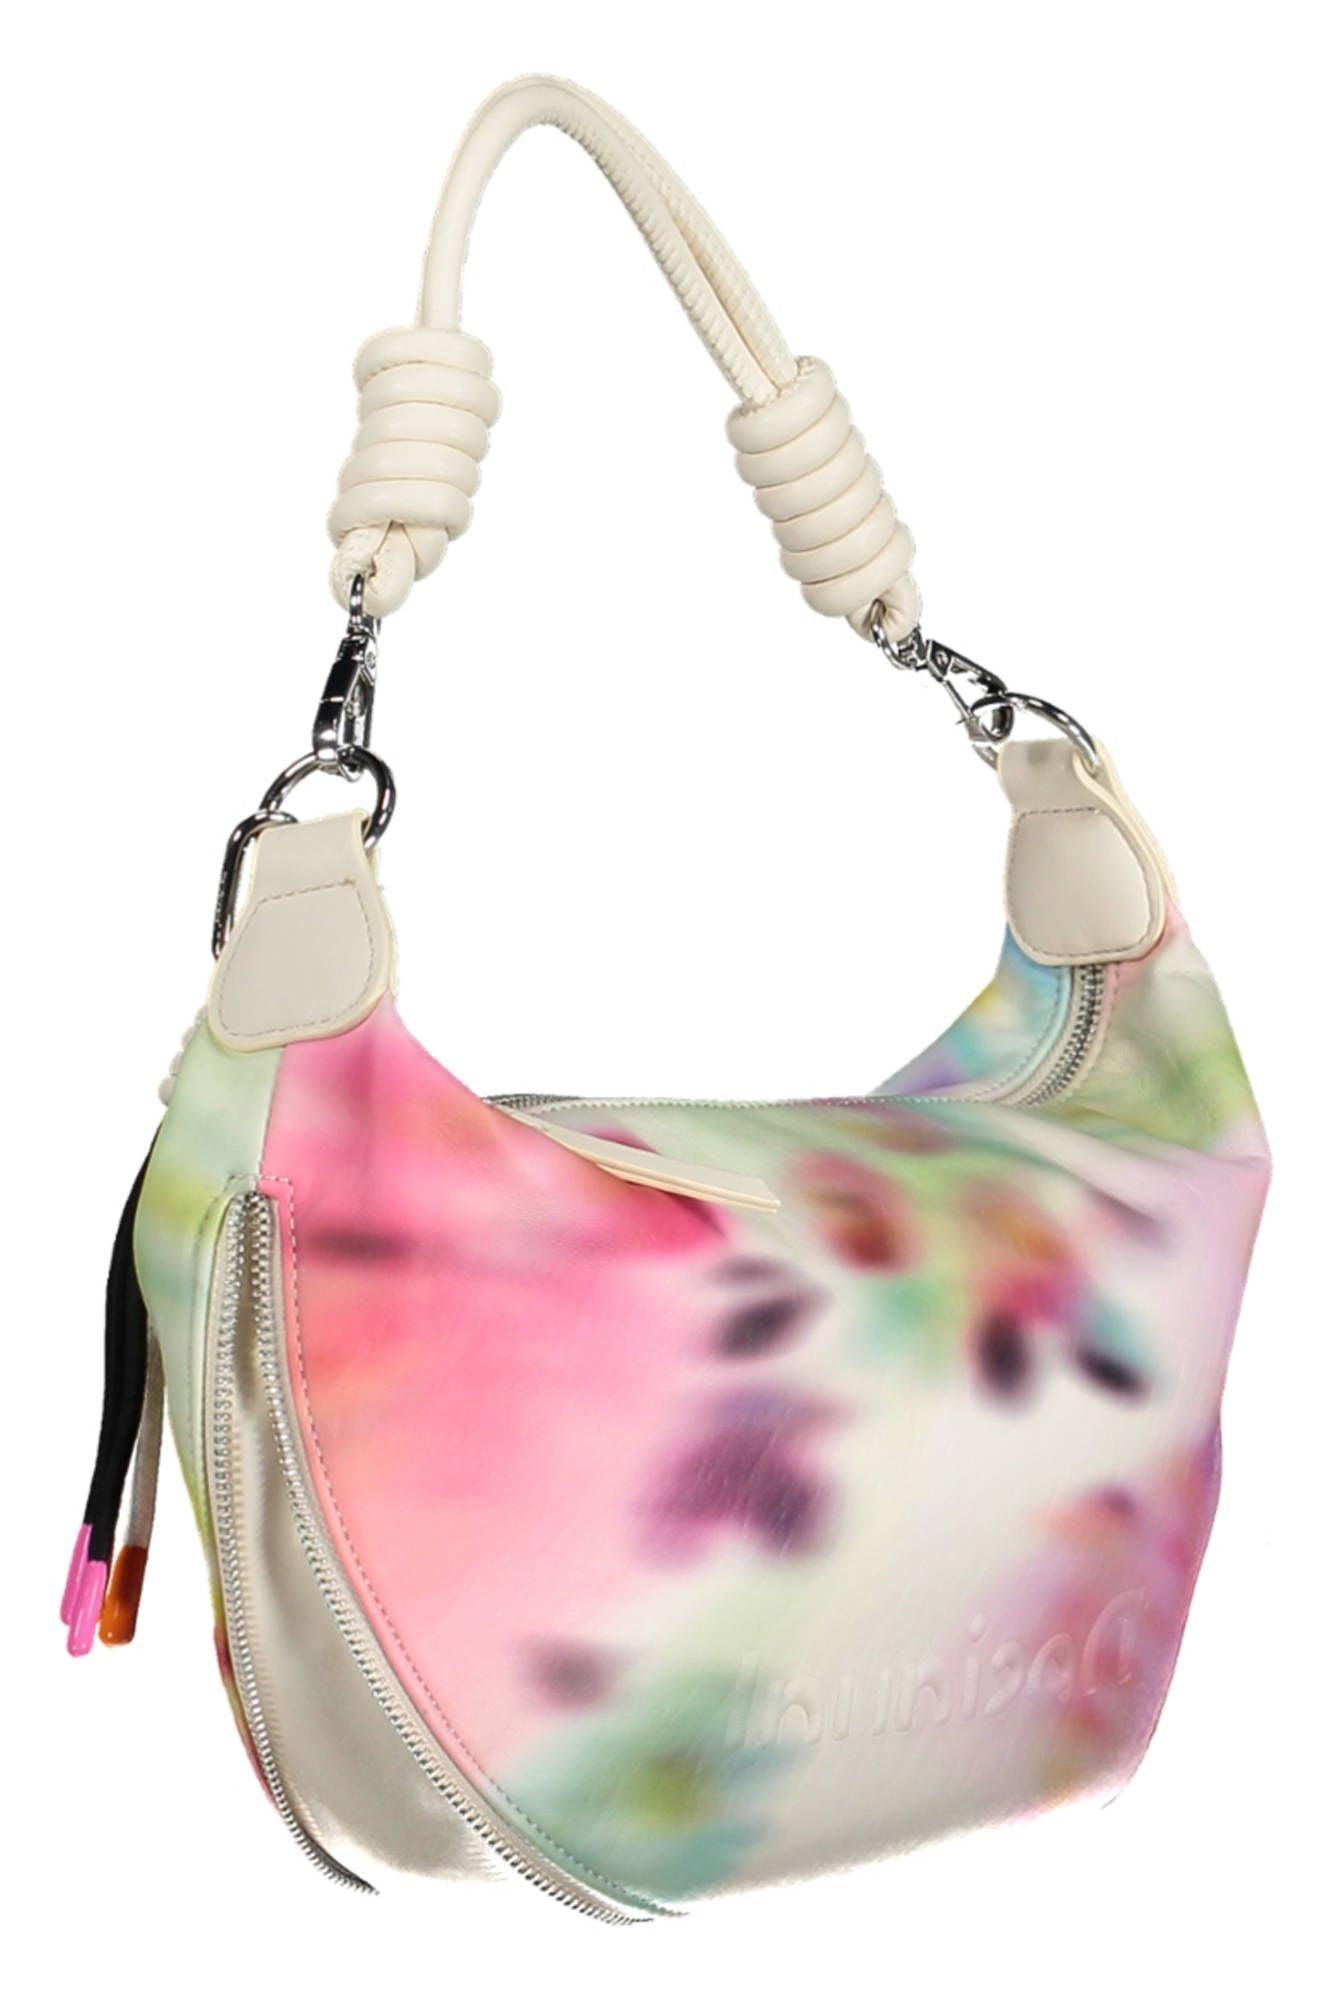 Desigual Chic White Expandable Handbag with Contrasting Accents - PER.FASHION